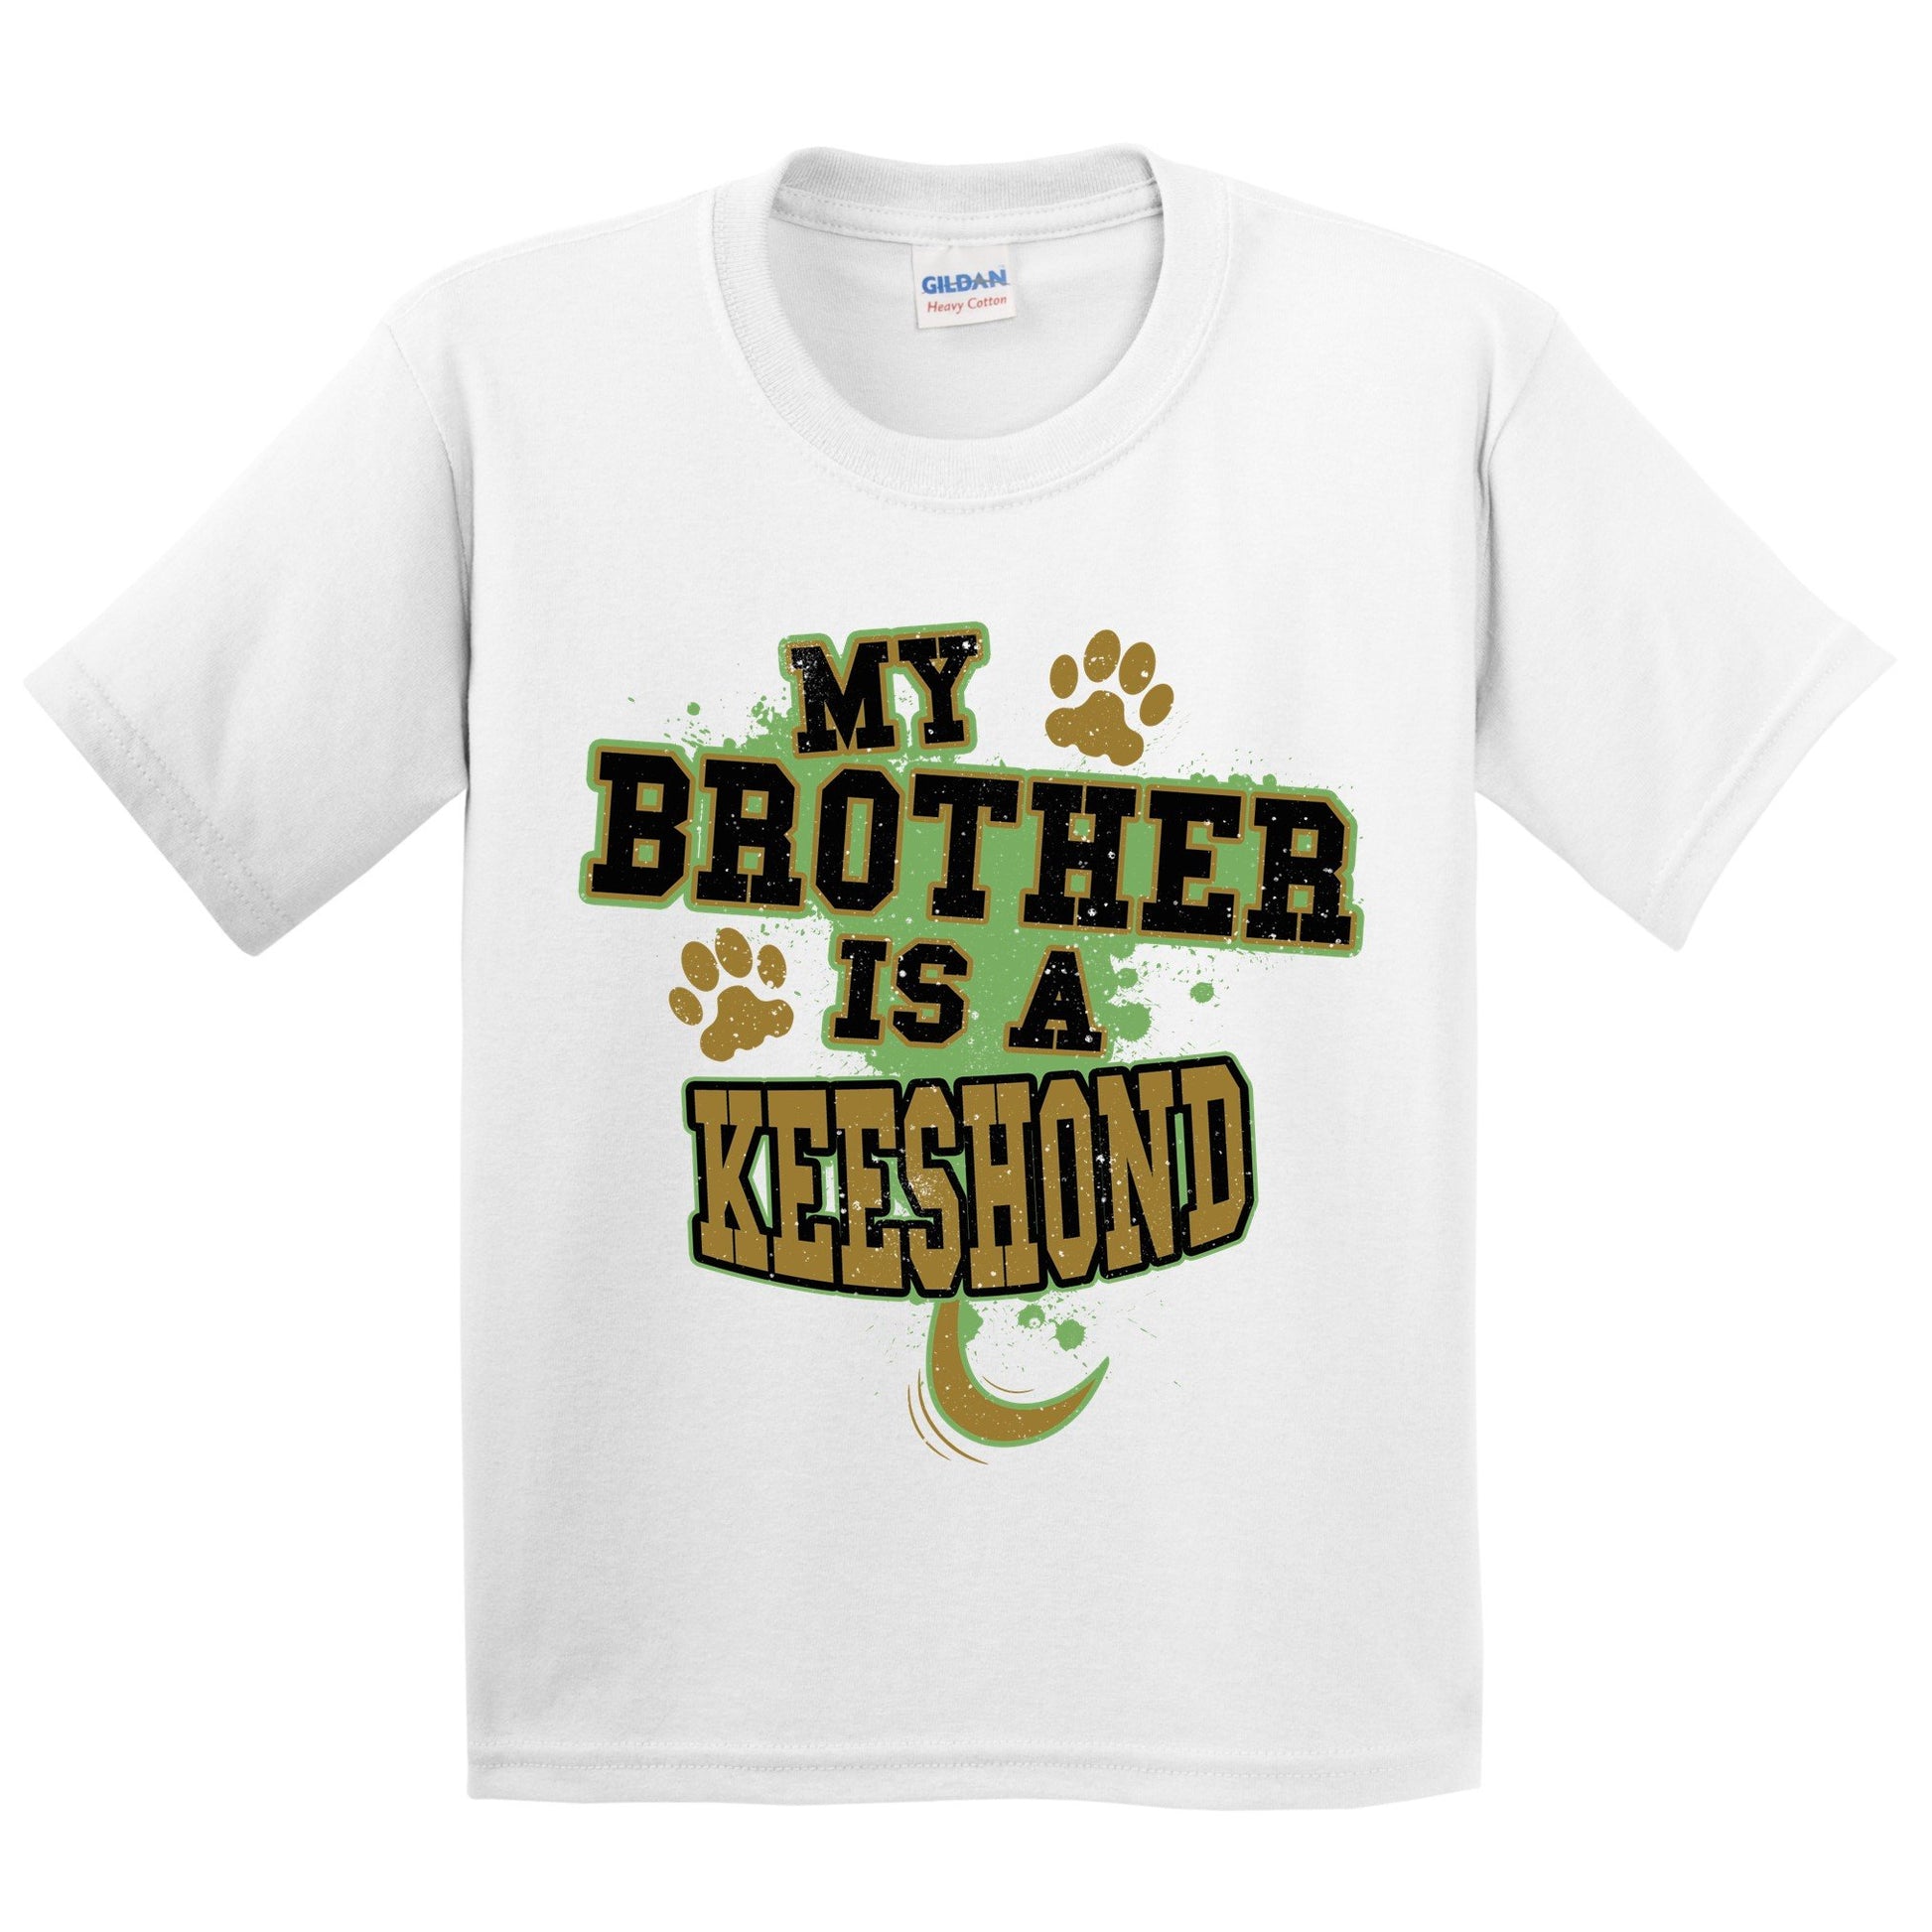 My Brother Is A Keeshond Funny Dog Kids Youth T-Shirt